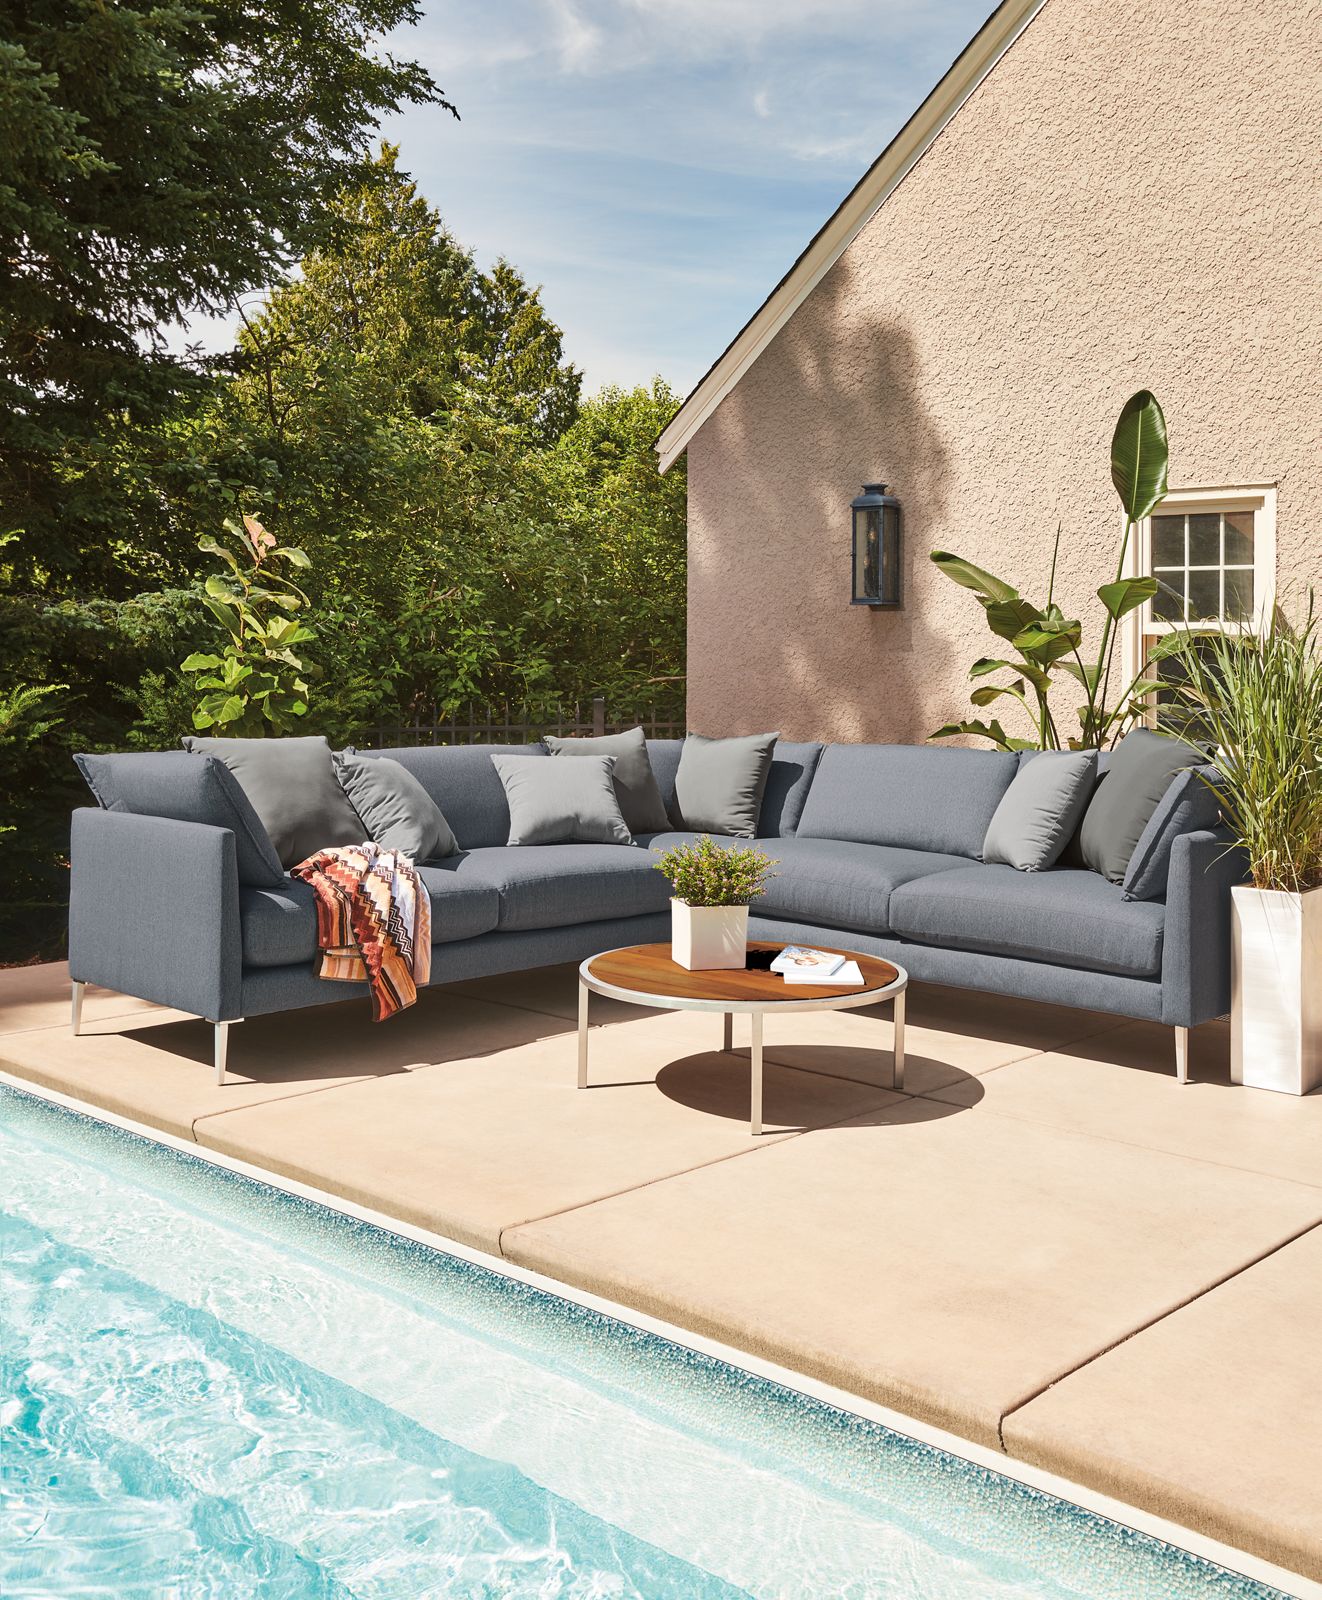 Patio setting with a Palm Three-Piece Sectional, Montego Round Coffee Table and Hue Outdoor Pillows.